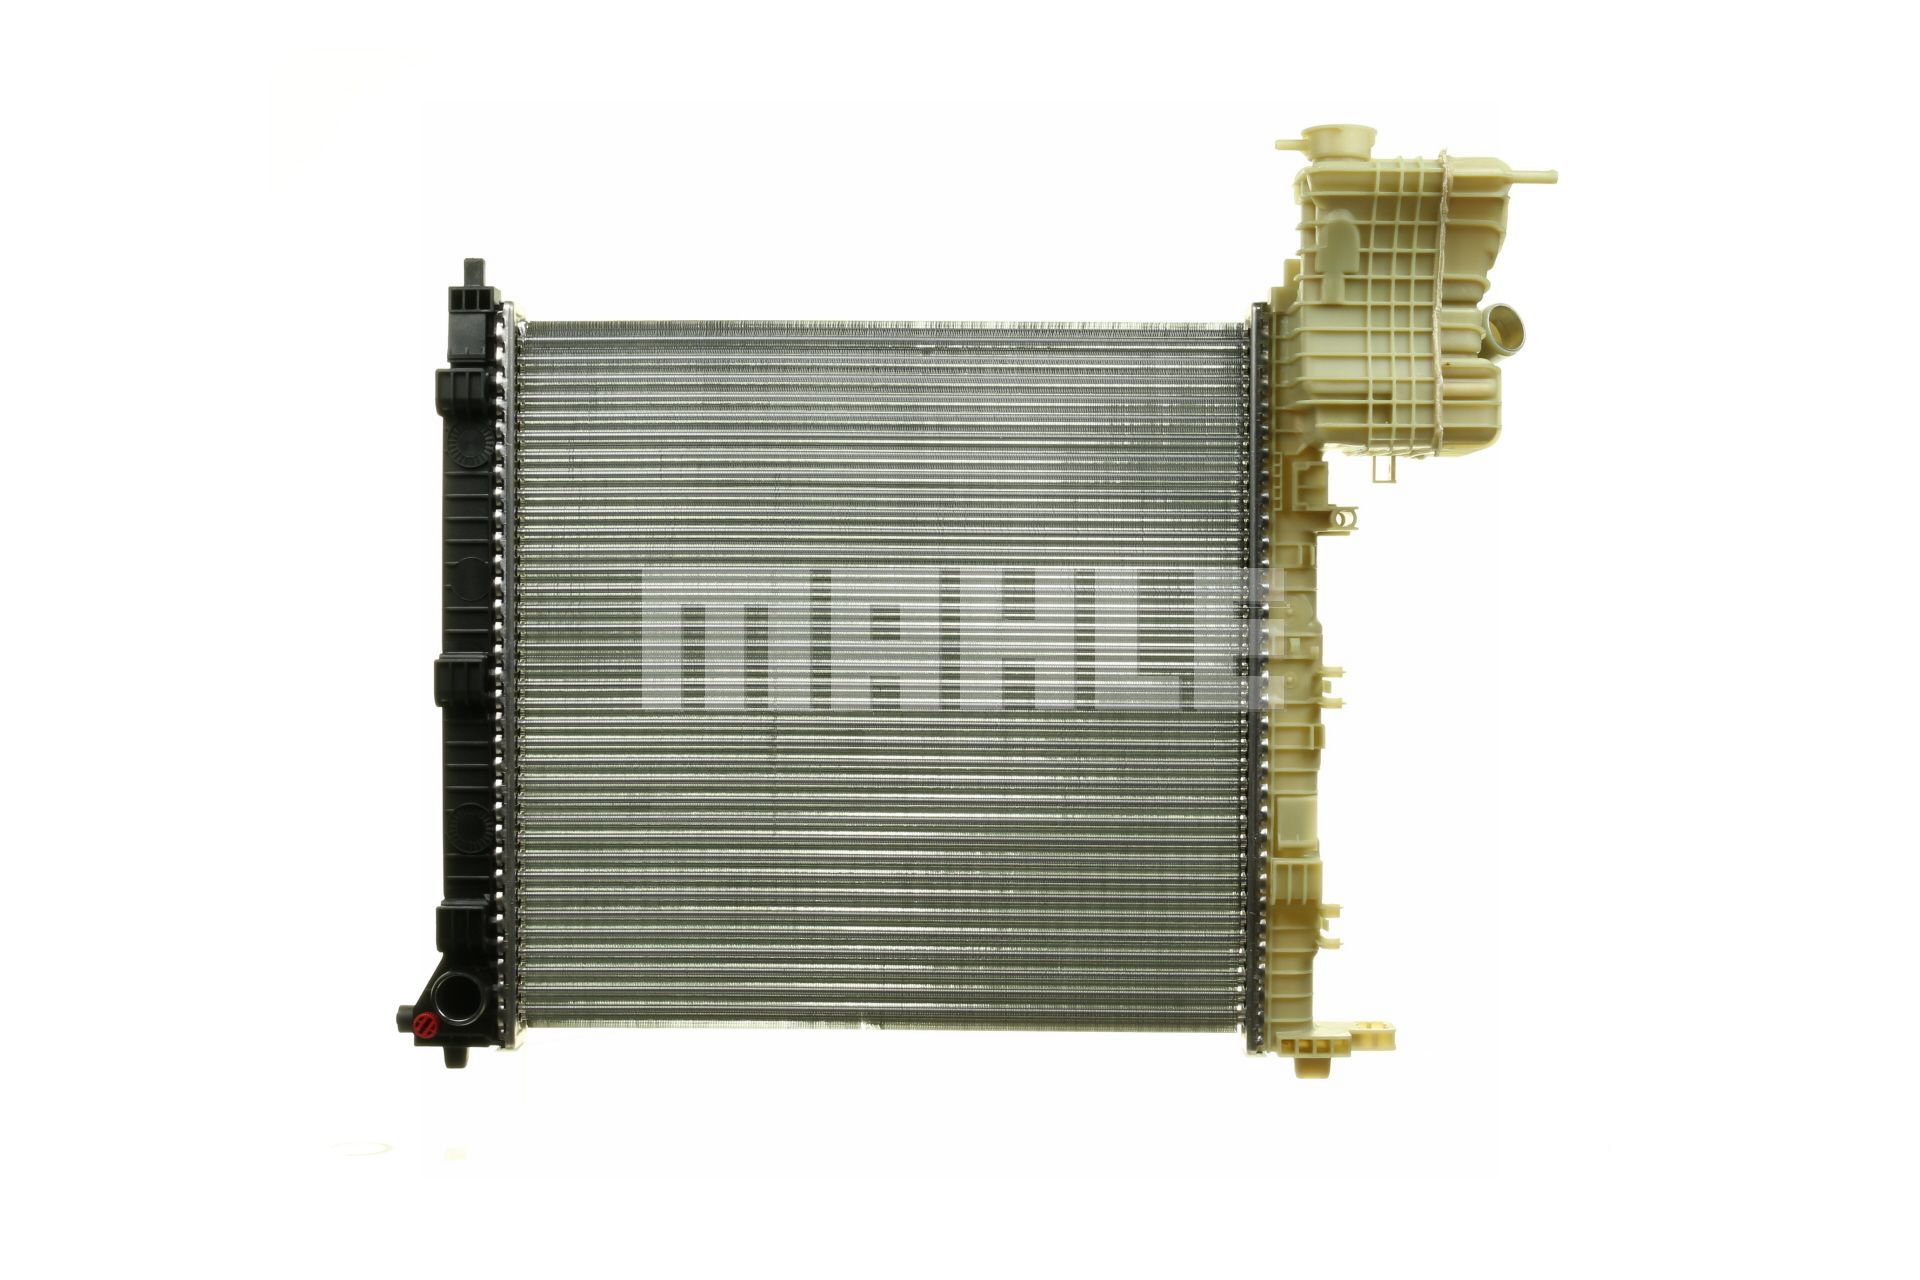 MAHLE ORIGINAL CR 714 000P Engine radiator for vehicles without air conditioning, 570 x 555 x 26 mm, Brazed cooling fins